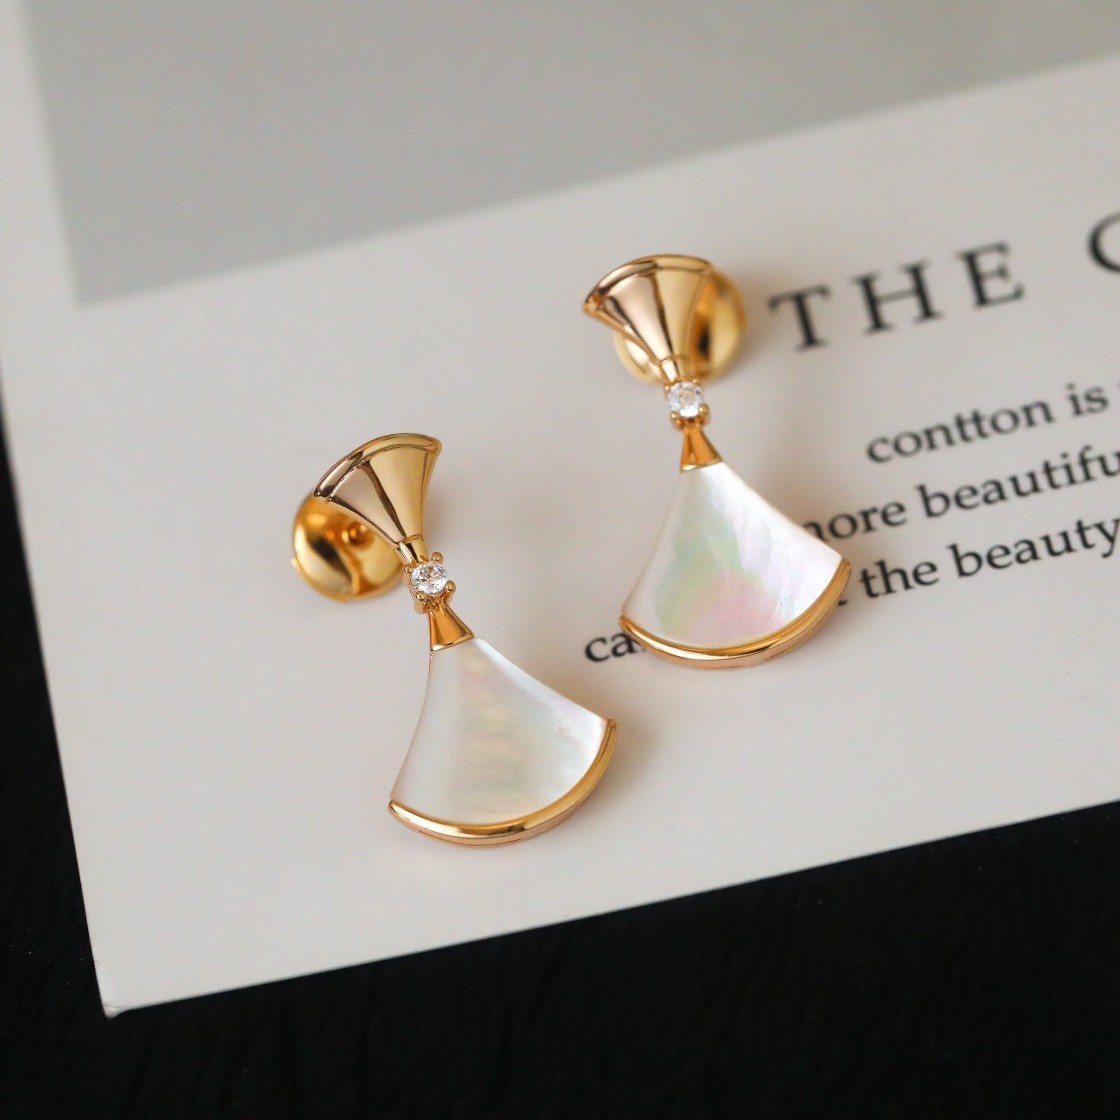 Bulgari Diva's DREAM Earrings Rose Gold With Mother-of-pearl and